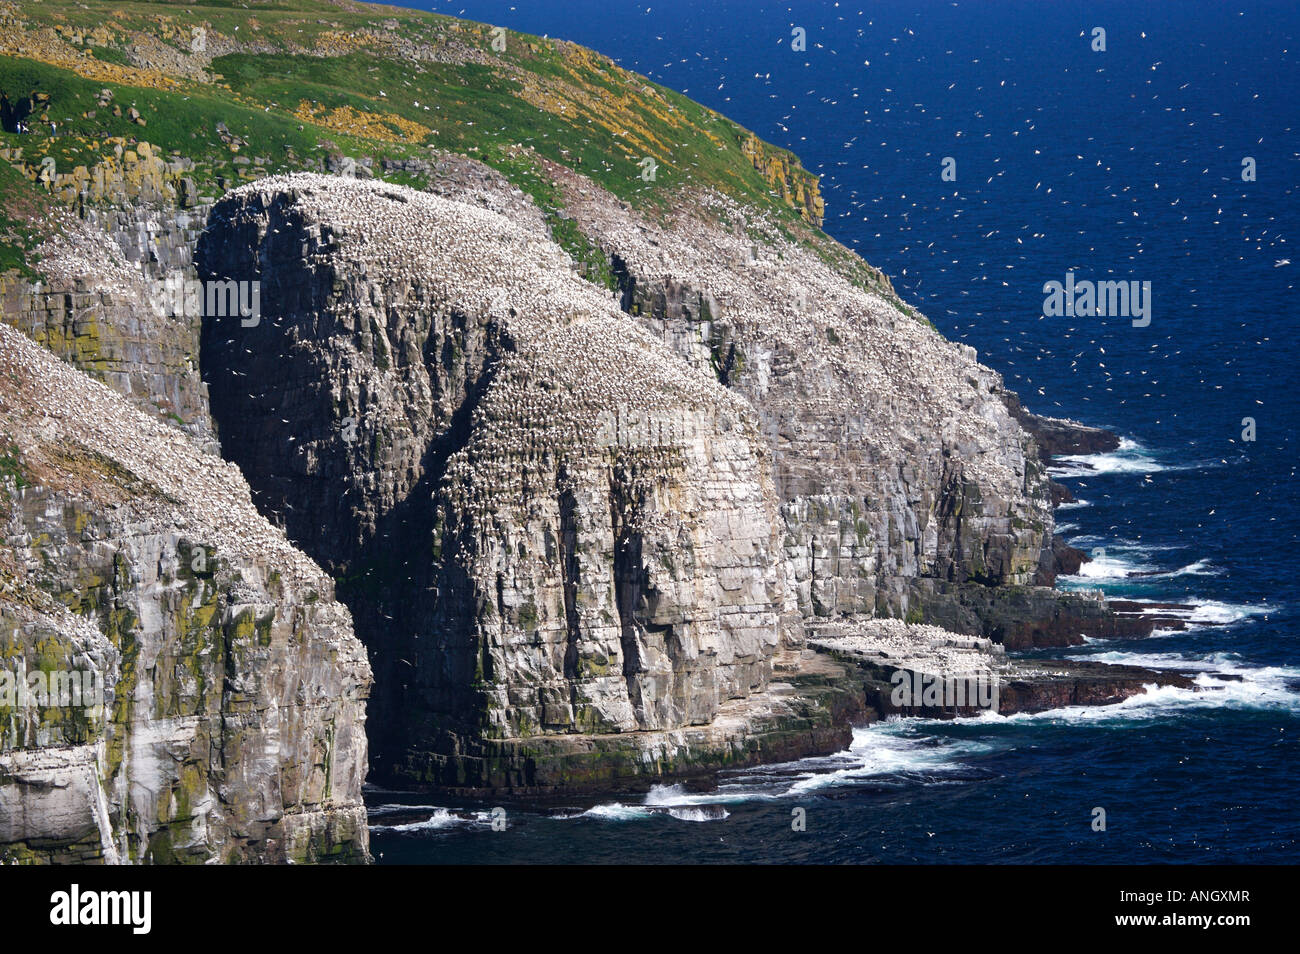 Sheer cliffs and coastline at the Cape St Mary's Ecological Reserve, Cape St Mary's, also known as The Cape, The Cape Shore, Pla Stock Photo